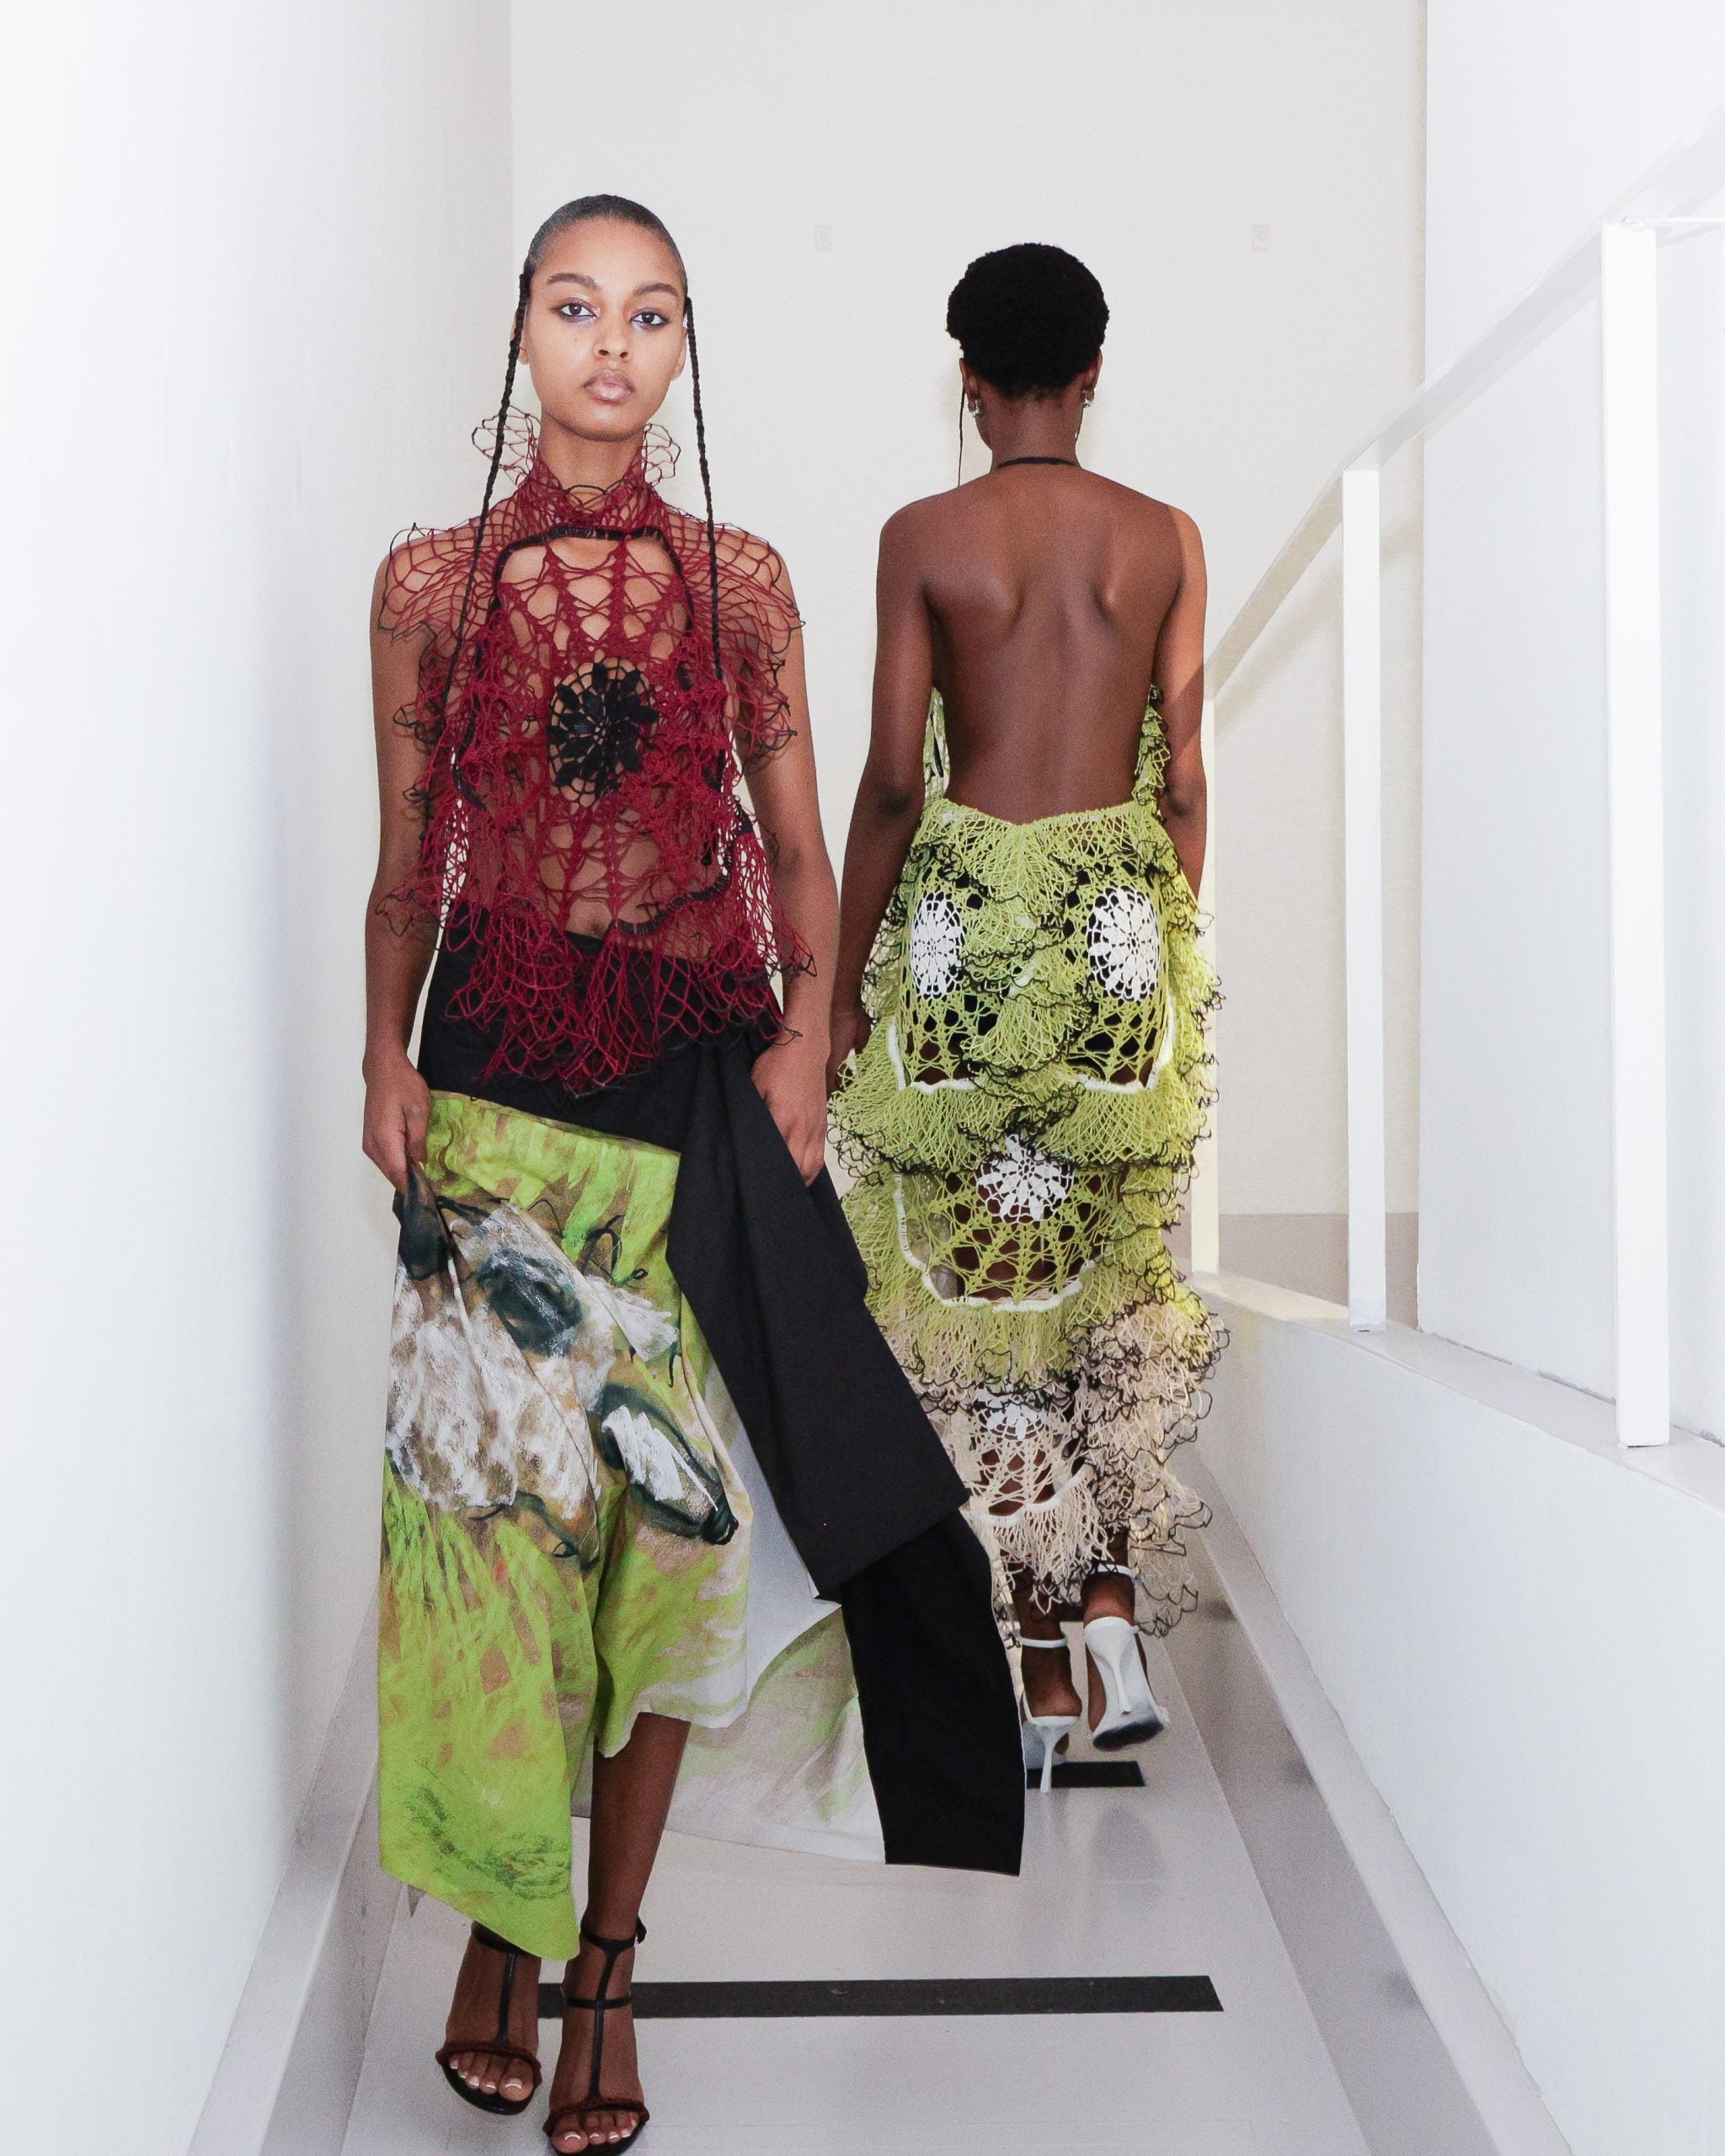 Rachel Scott Is Subverting Caribbean Tropes In Latest Diotima Collection